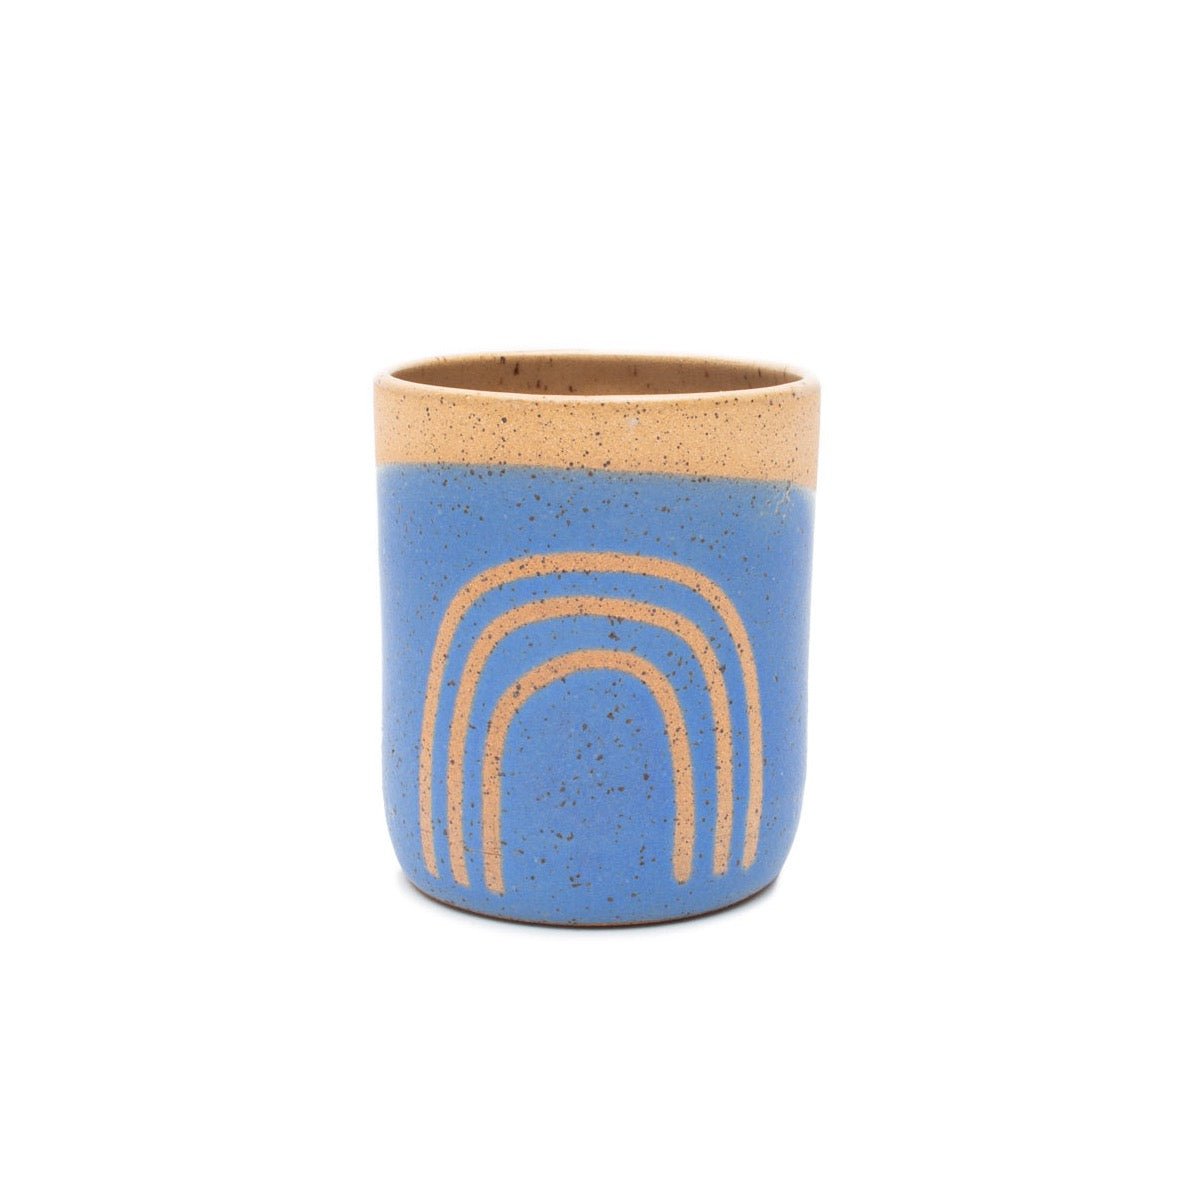 A handless tumbler in matte blue glaze and natural speckled clay rainbow outline. The Tall Tumbler in Cobalt with Rainbow is designed and handmade by Sunflower Studio in Portland, OR.